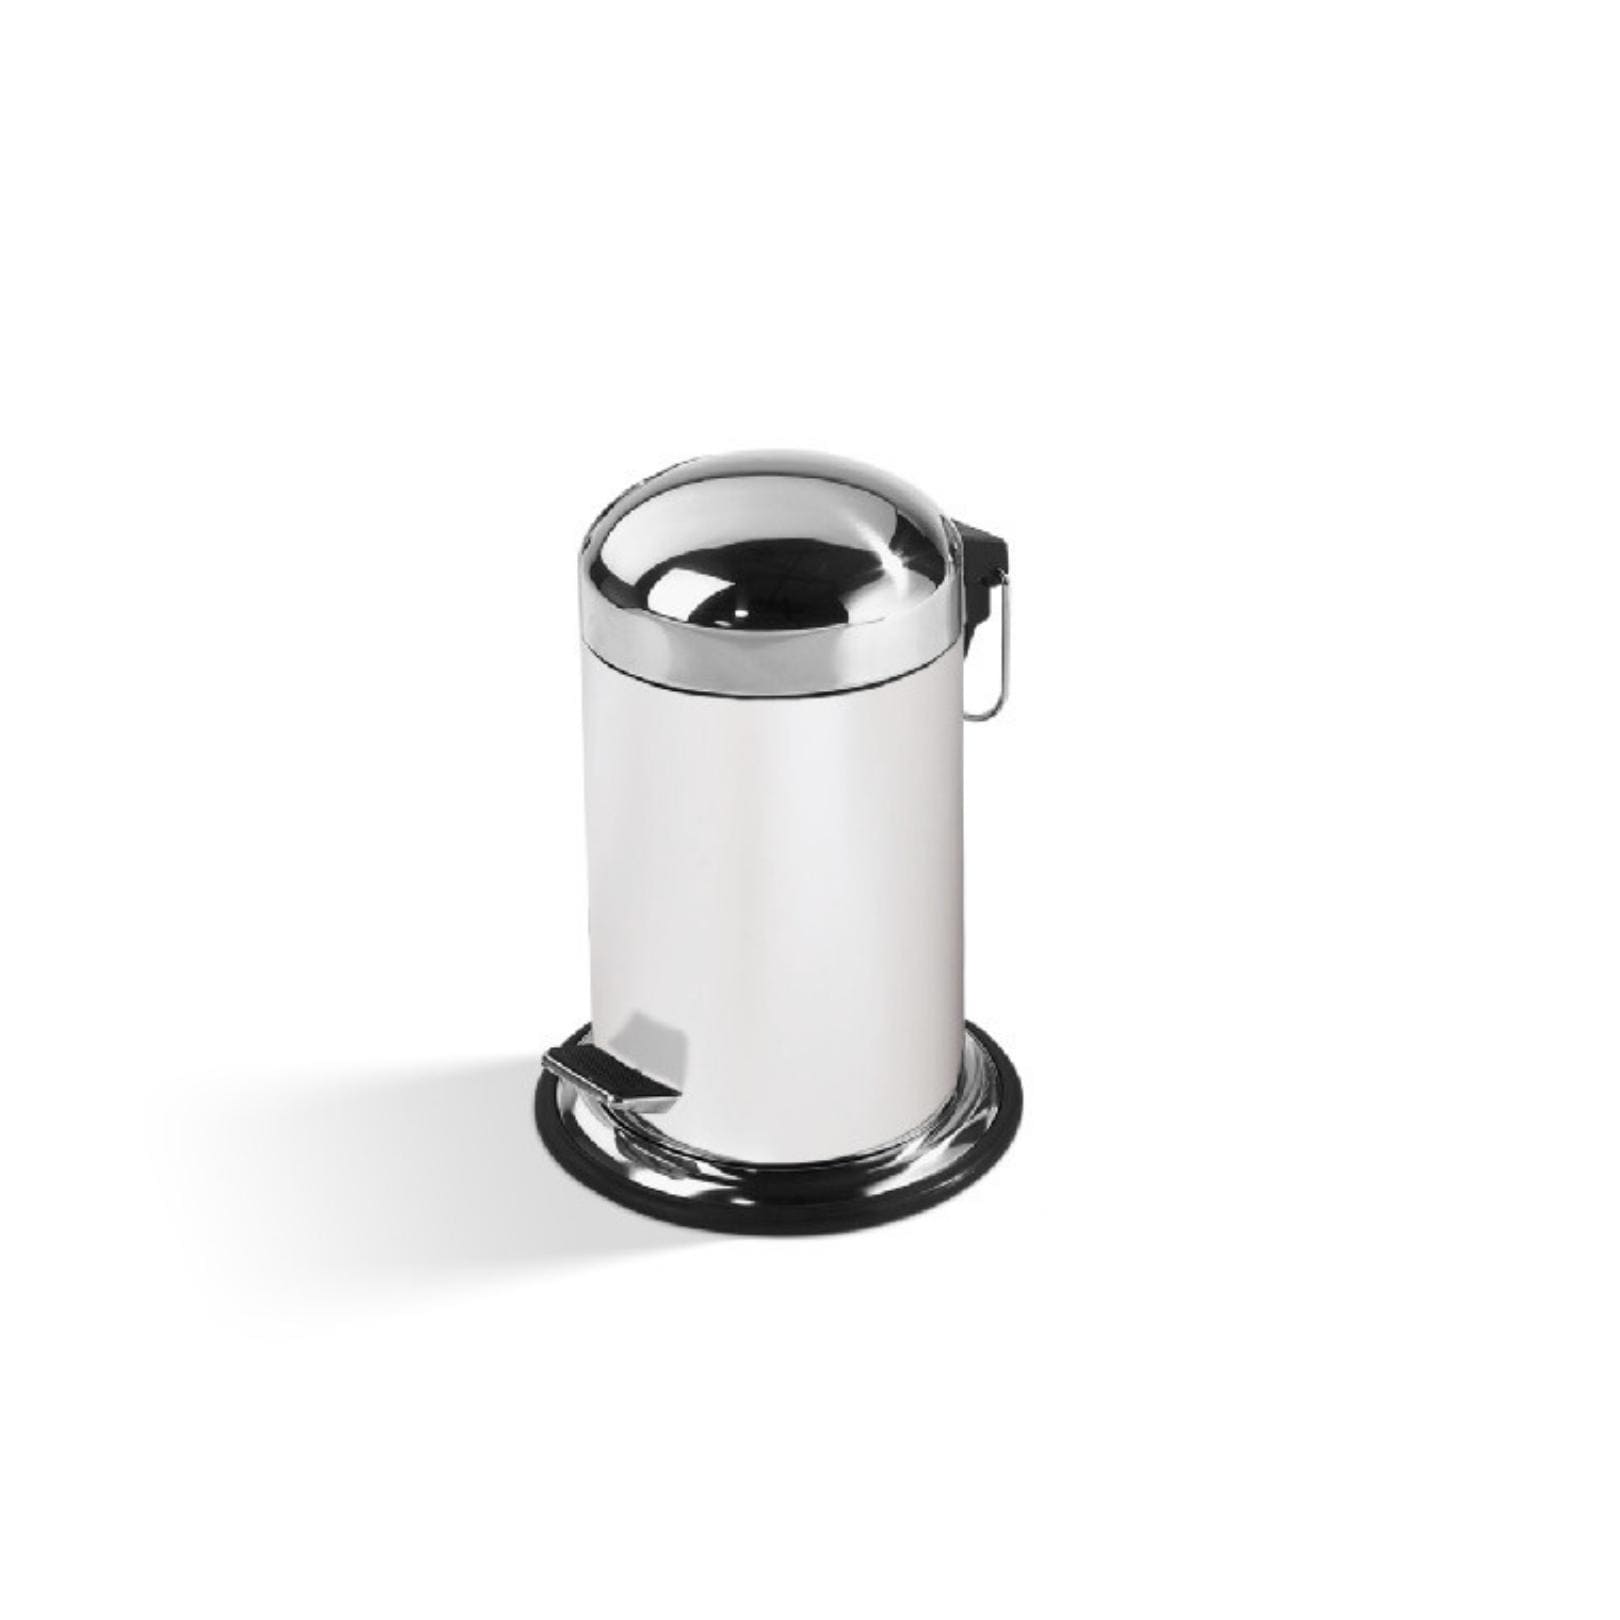 Pedal Pedal bin white / stainless steel polished Te 30 Decor Walther